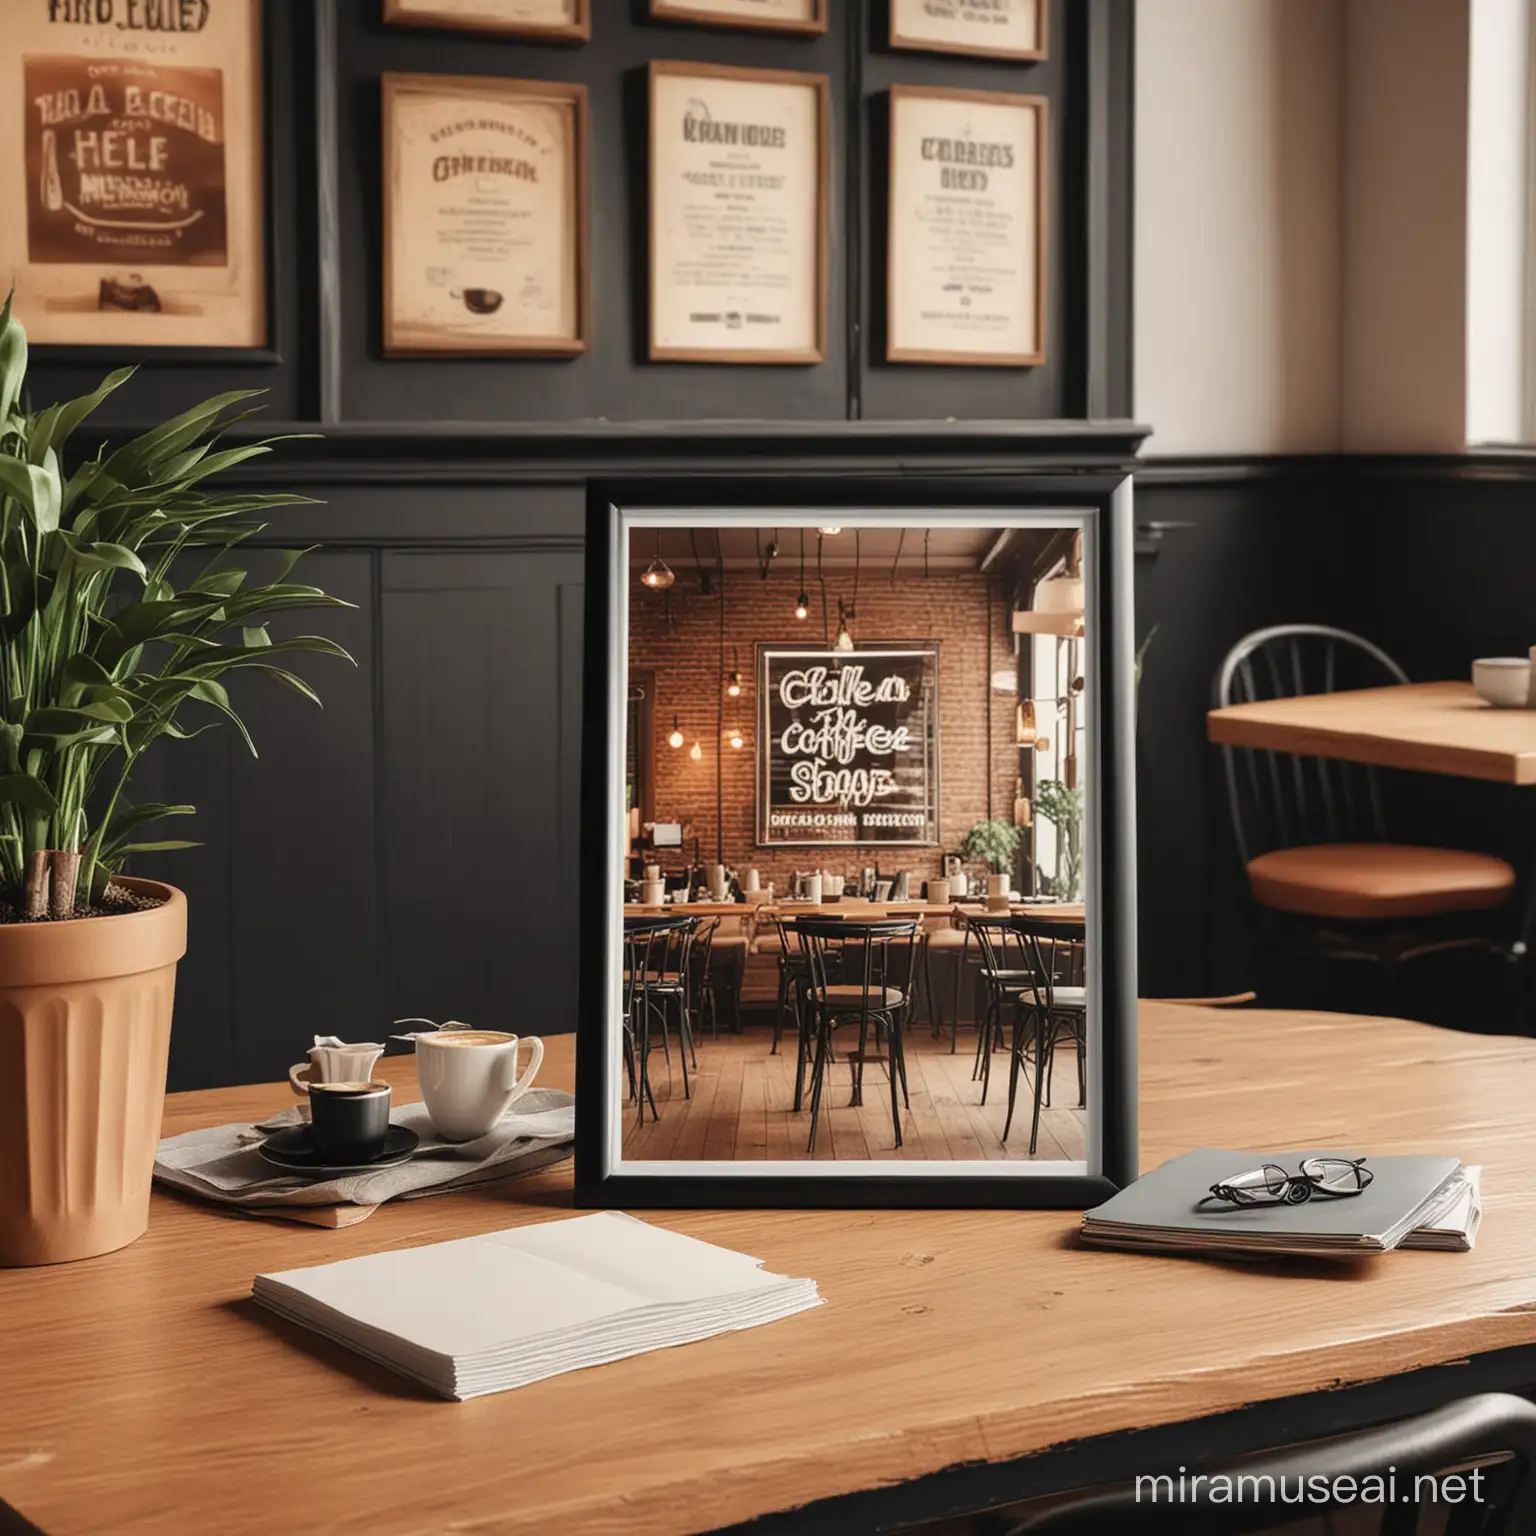 A4 black frame mockup on a table in a retro coffee shop